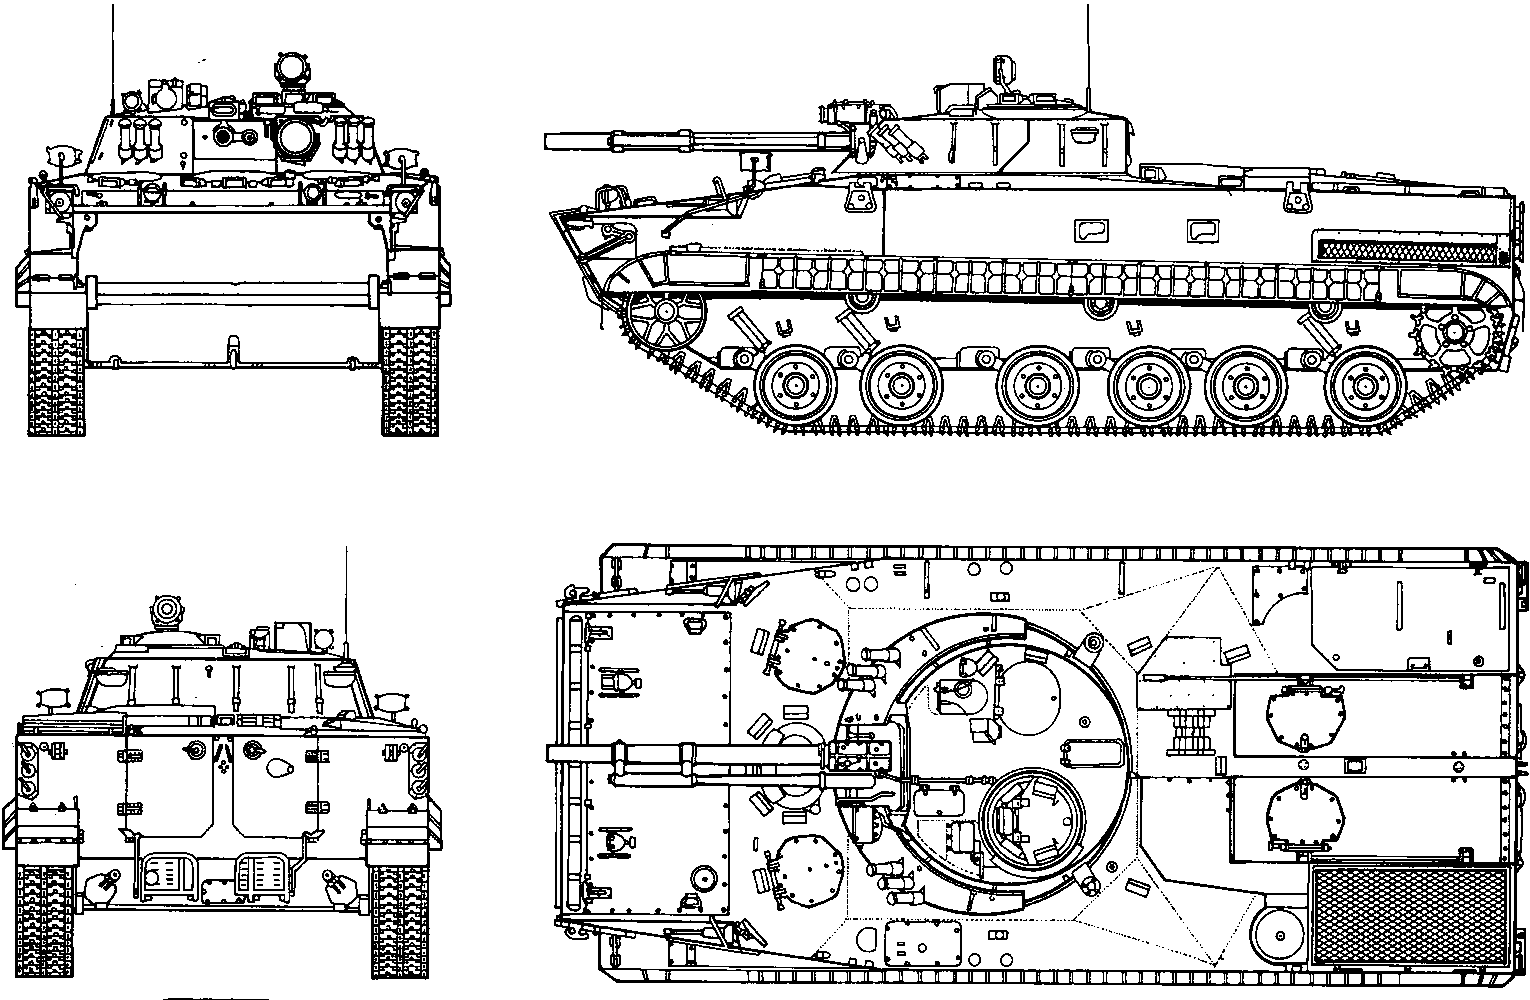 Plan of the The BMP-3 Infantry Fighting Vehicle